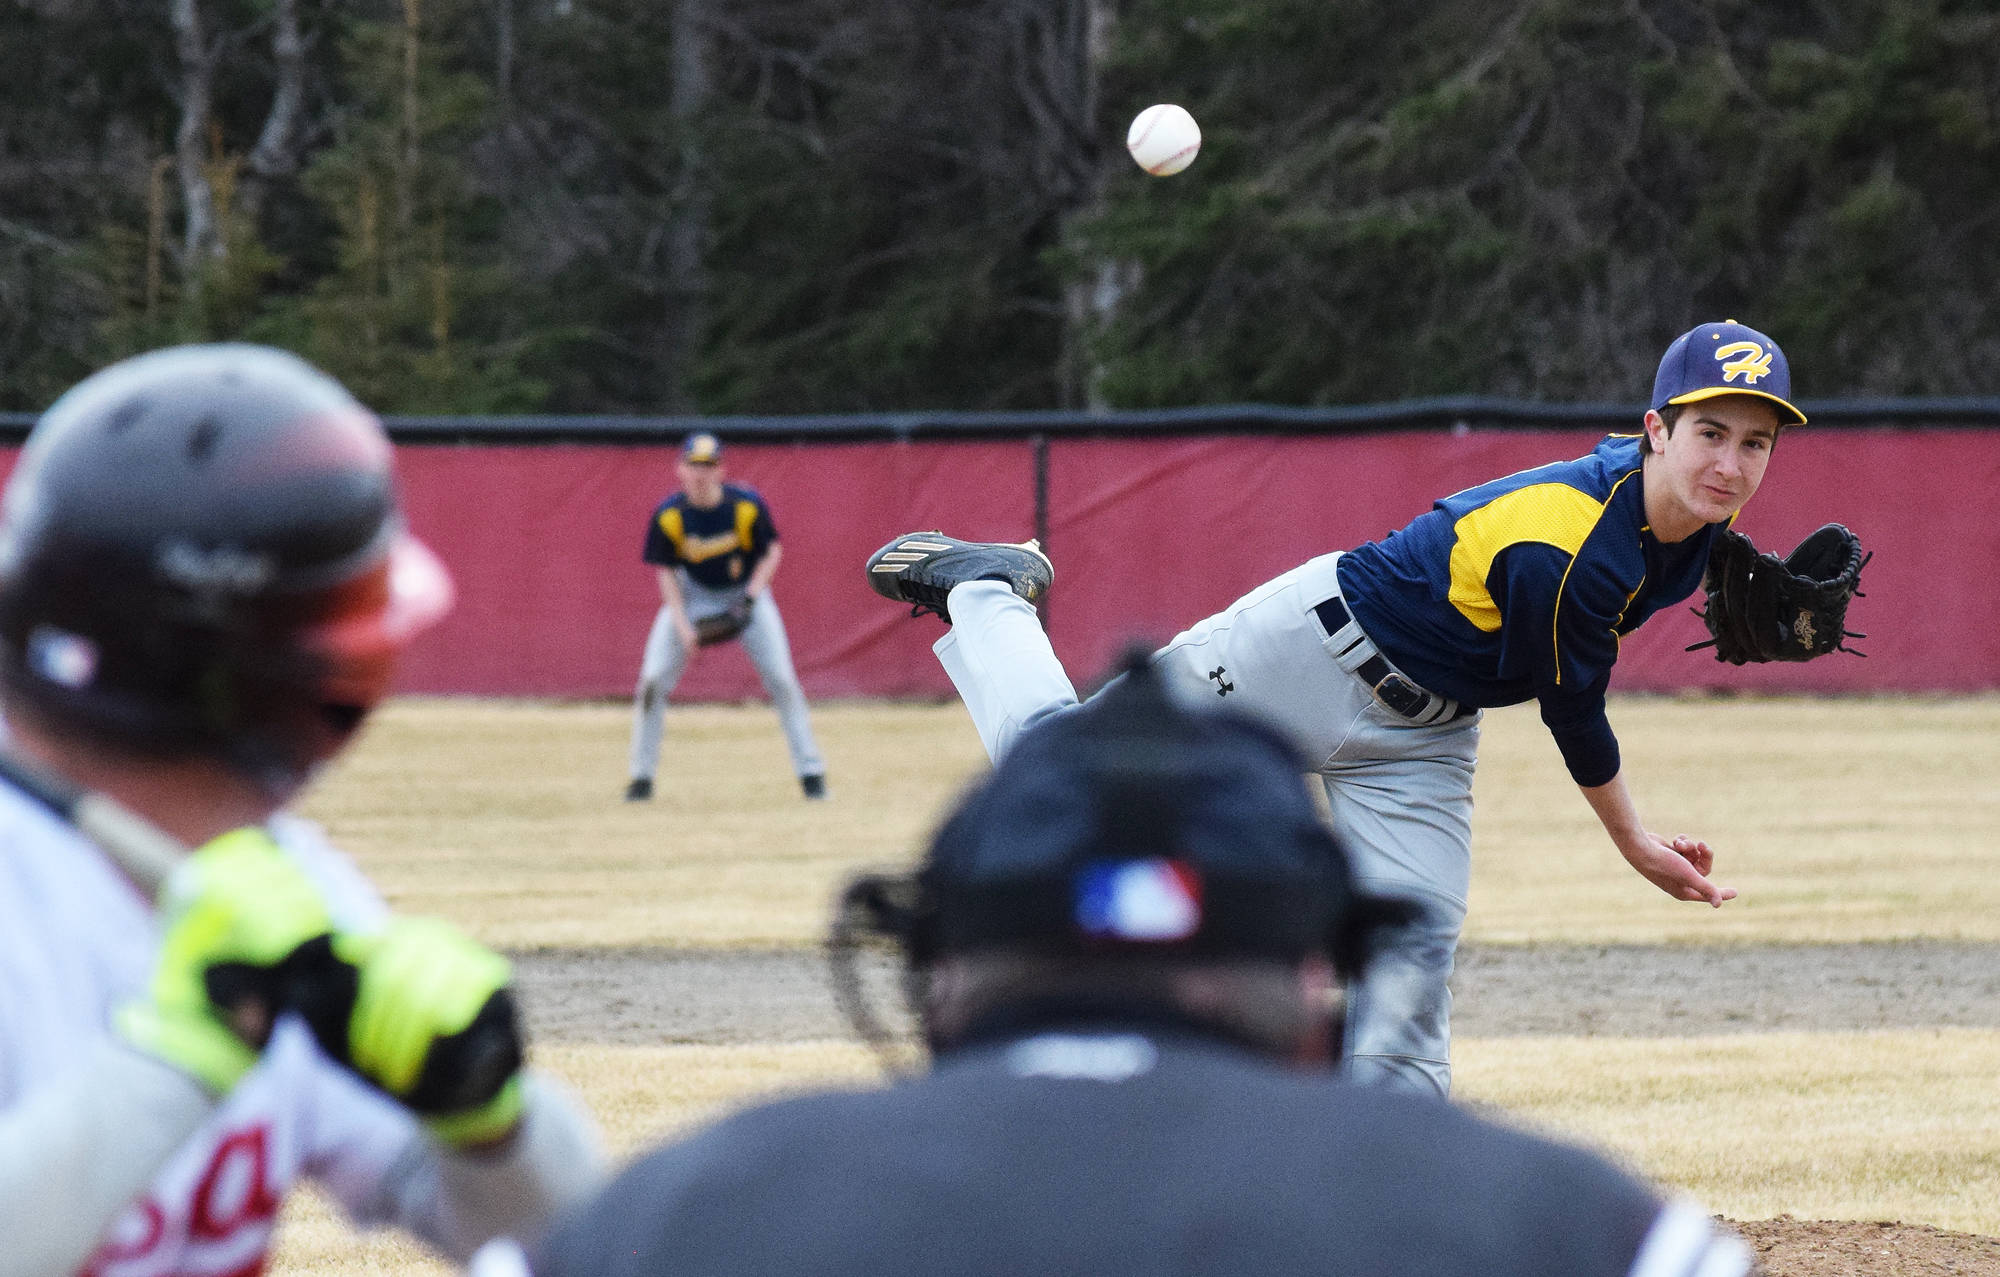 Homer’s Joe Ravin offers up a pitch to a Kenai Central batter Tuesday evening at the Kenai Little League Fields. (Photo by Joey Klecka/Peninsula Clarion)